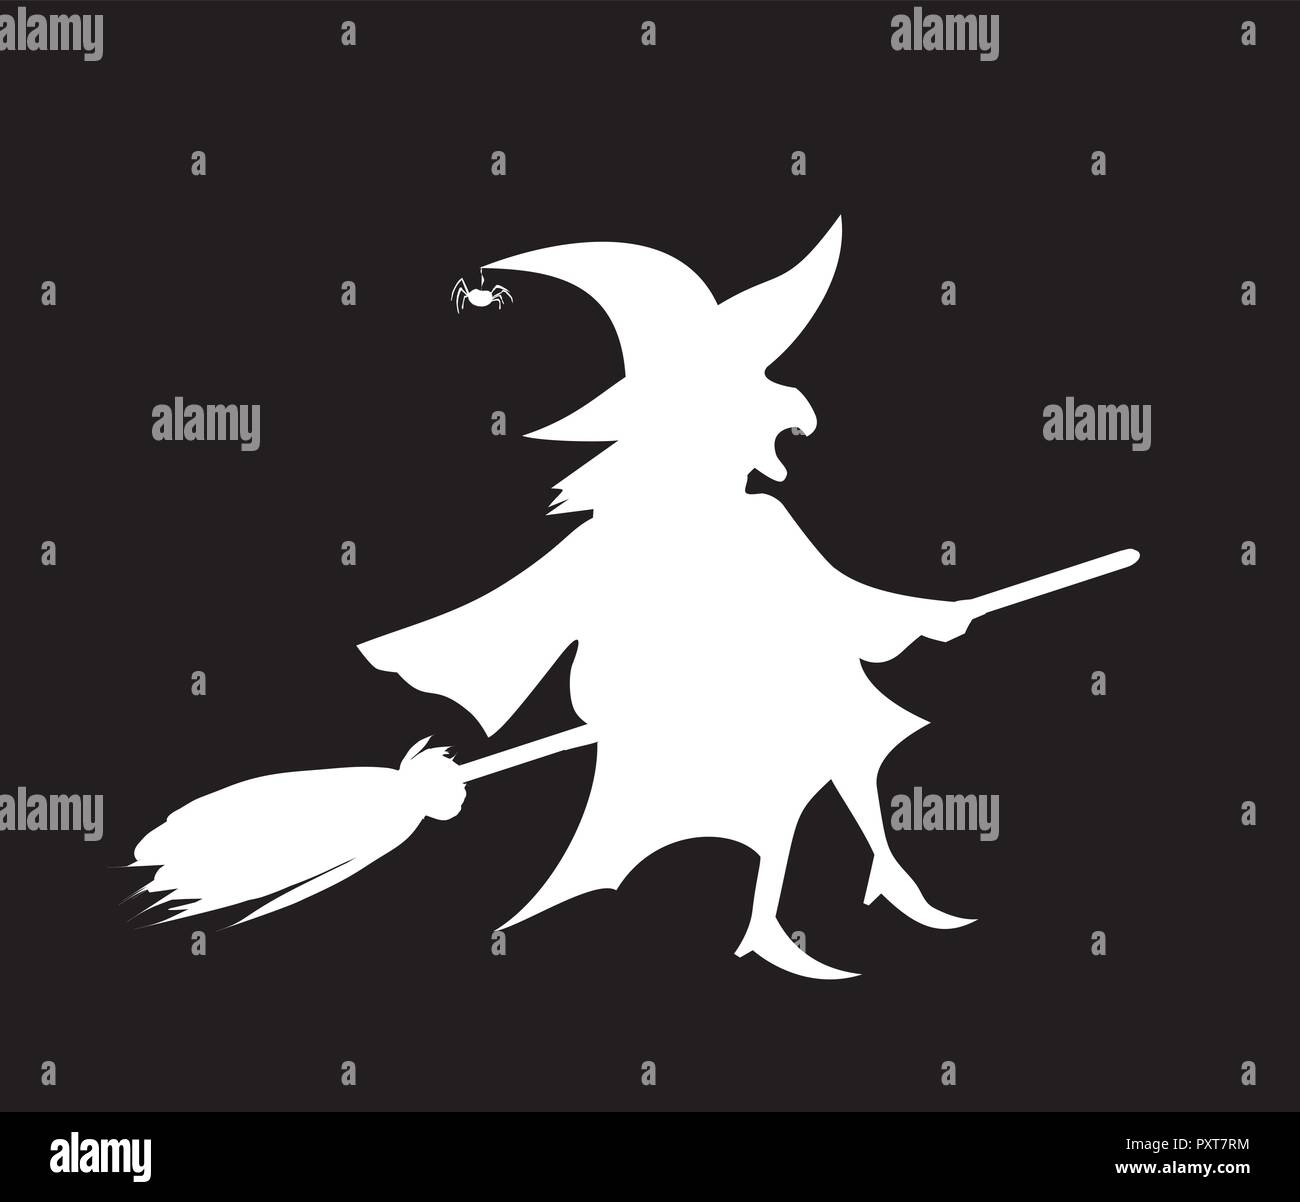 White silhouette of witch in hat and costume flying on broomstick isolated on black background. Halloween celebration vector illustration, icon, retro Stock Vector